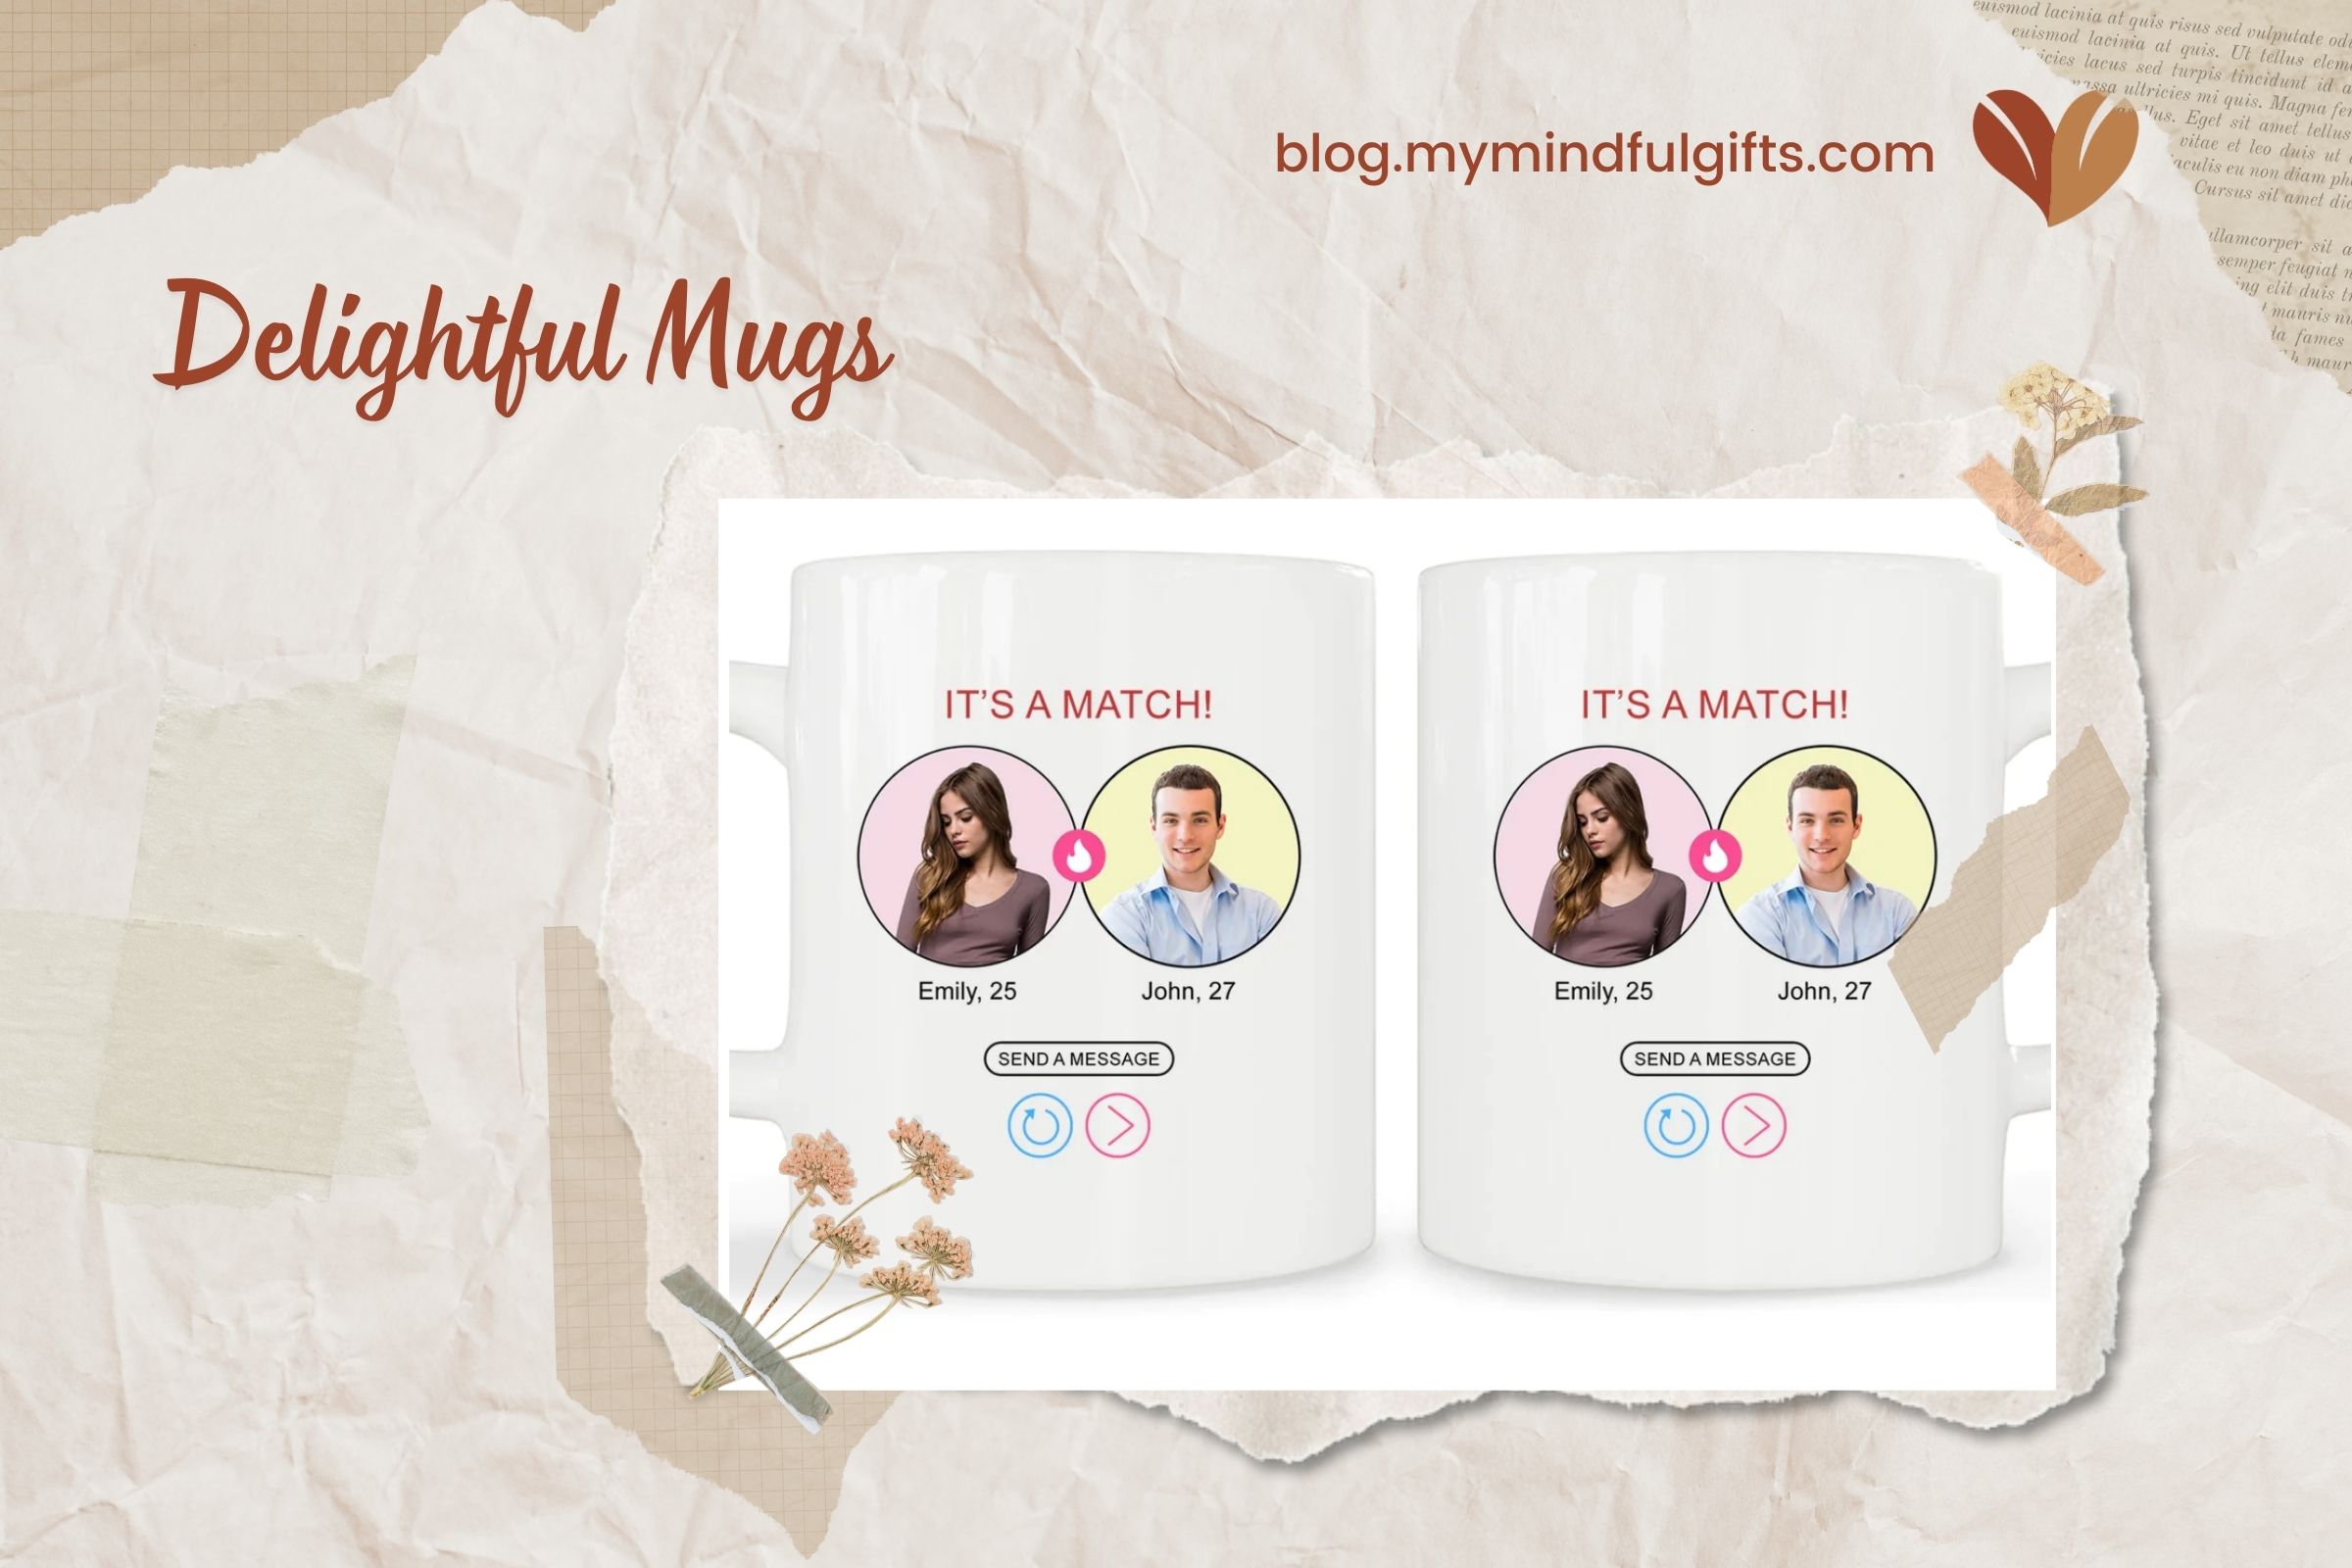 Delightful mug is a thoughtful and practical 21st anniversary gifts gift